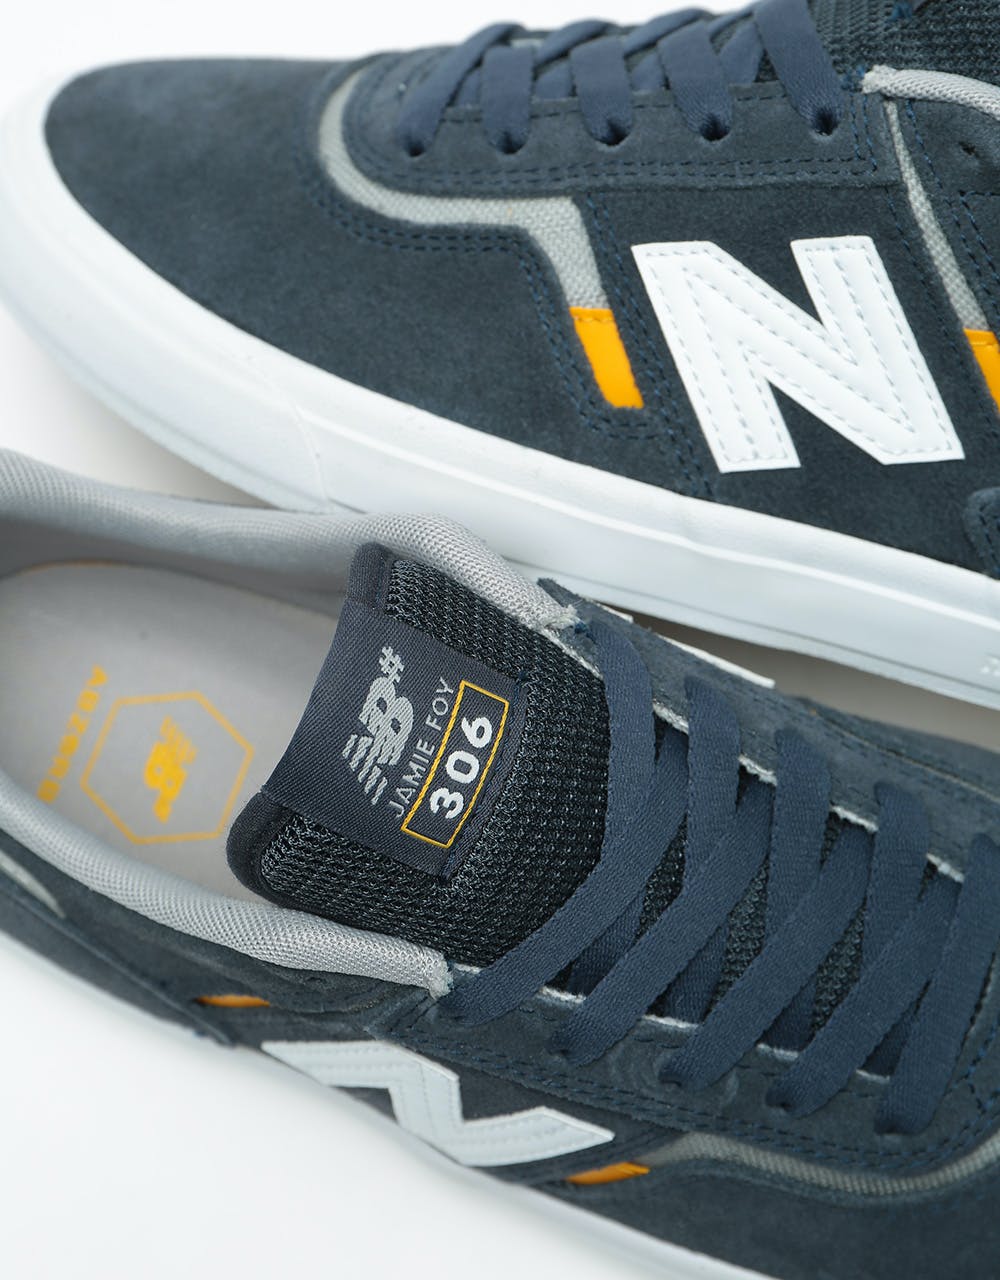 New Balance Numeric 306 Skate Shoes - Navy/Yellow